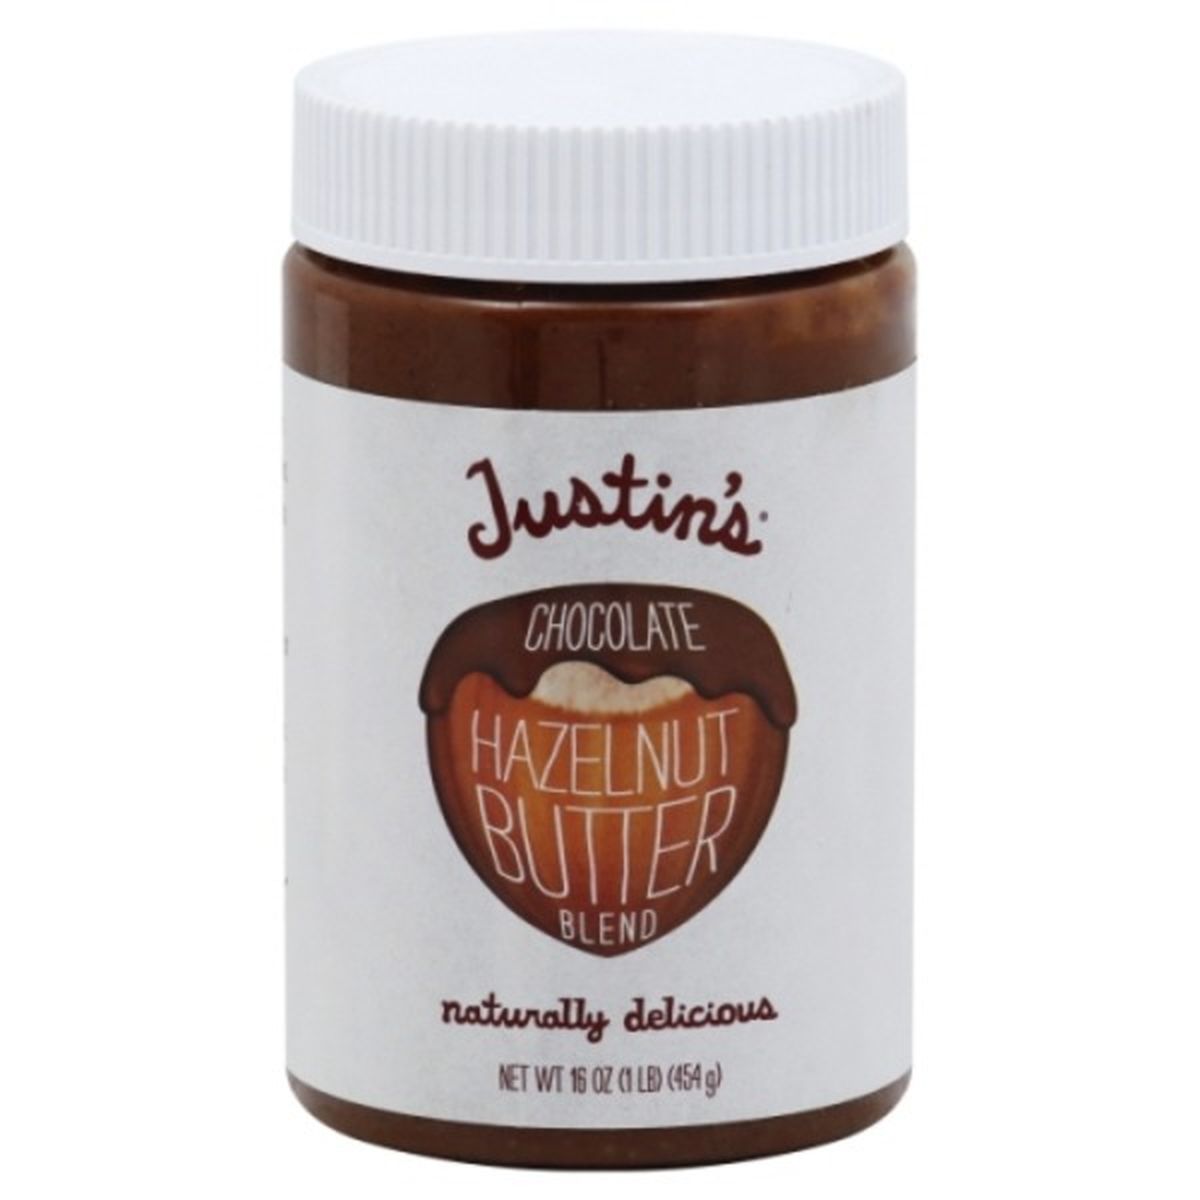 Calories in Justin's Hazelnut Butter Blend, Chocolate